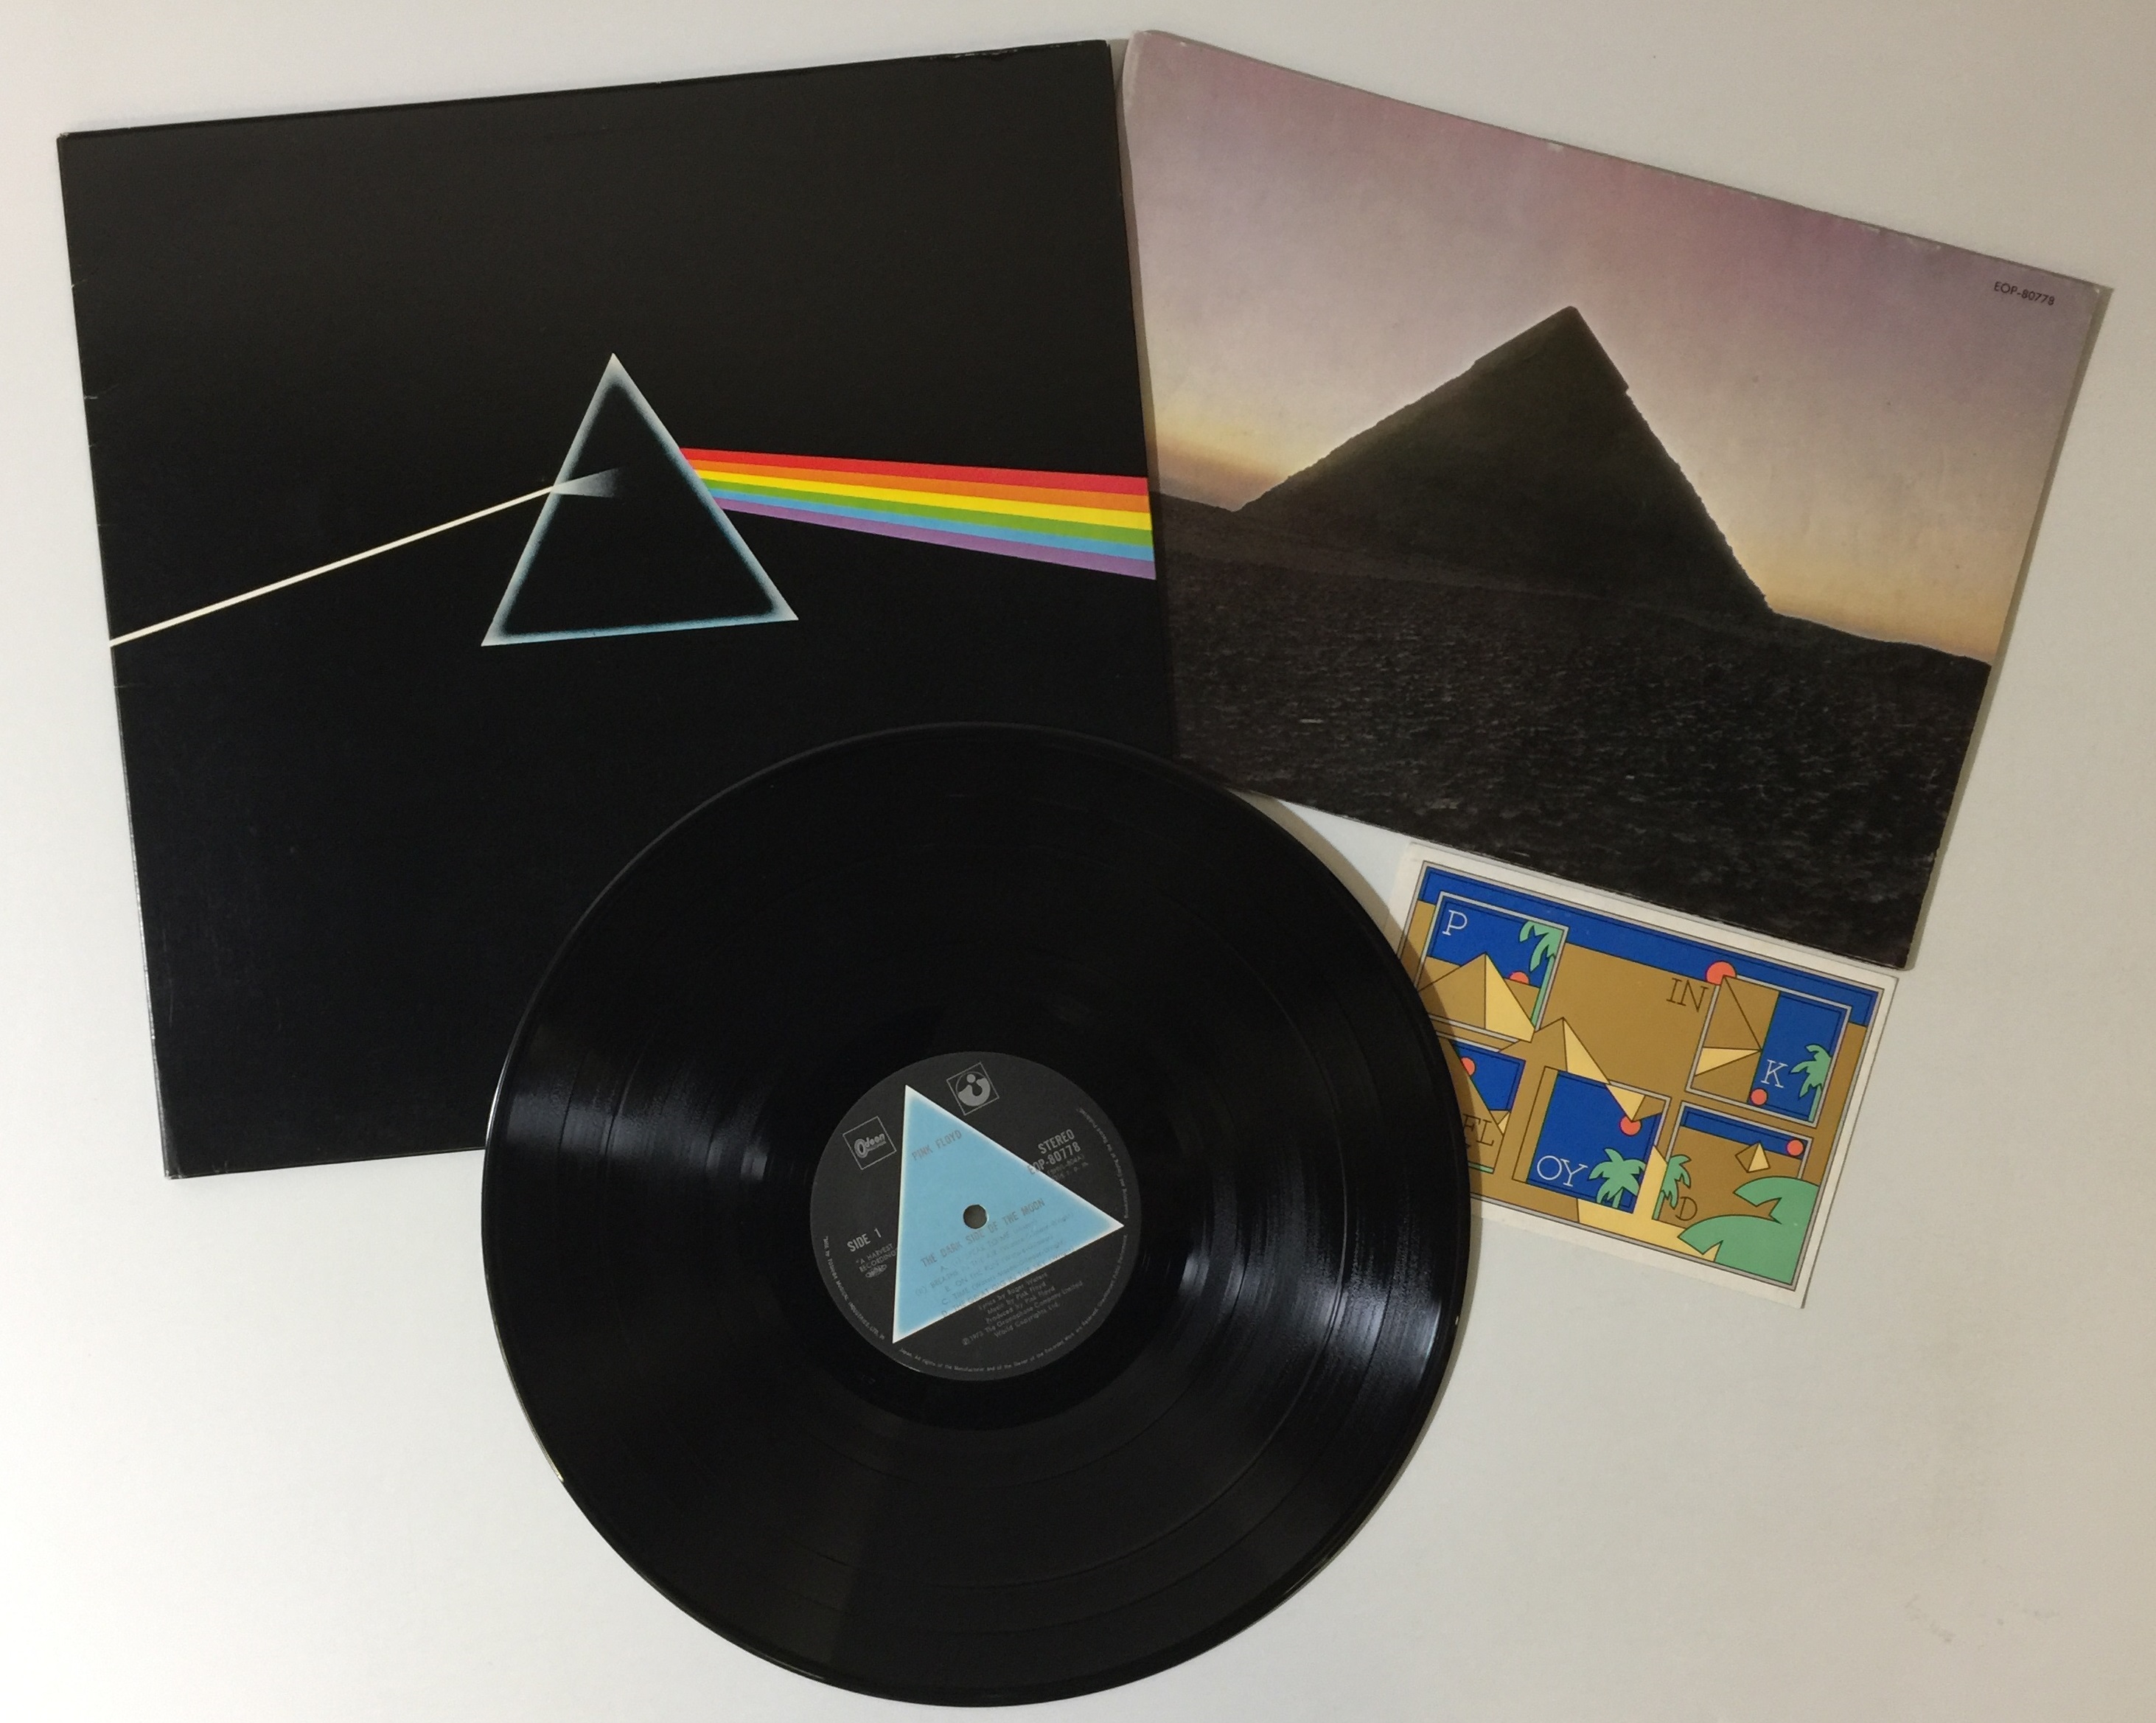 Lot 8 - PINK FLOYD - THE DARK SIDE OF THE MOON LP